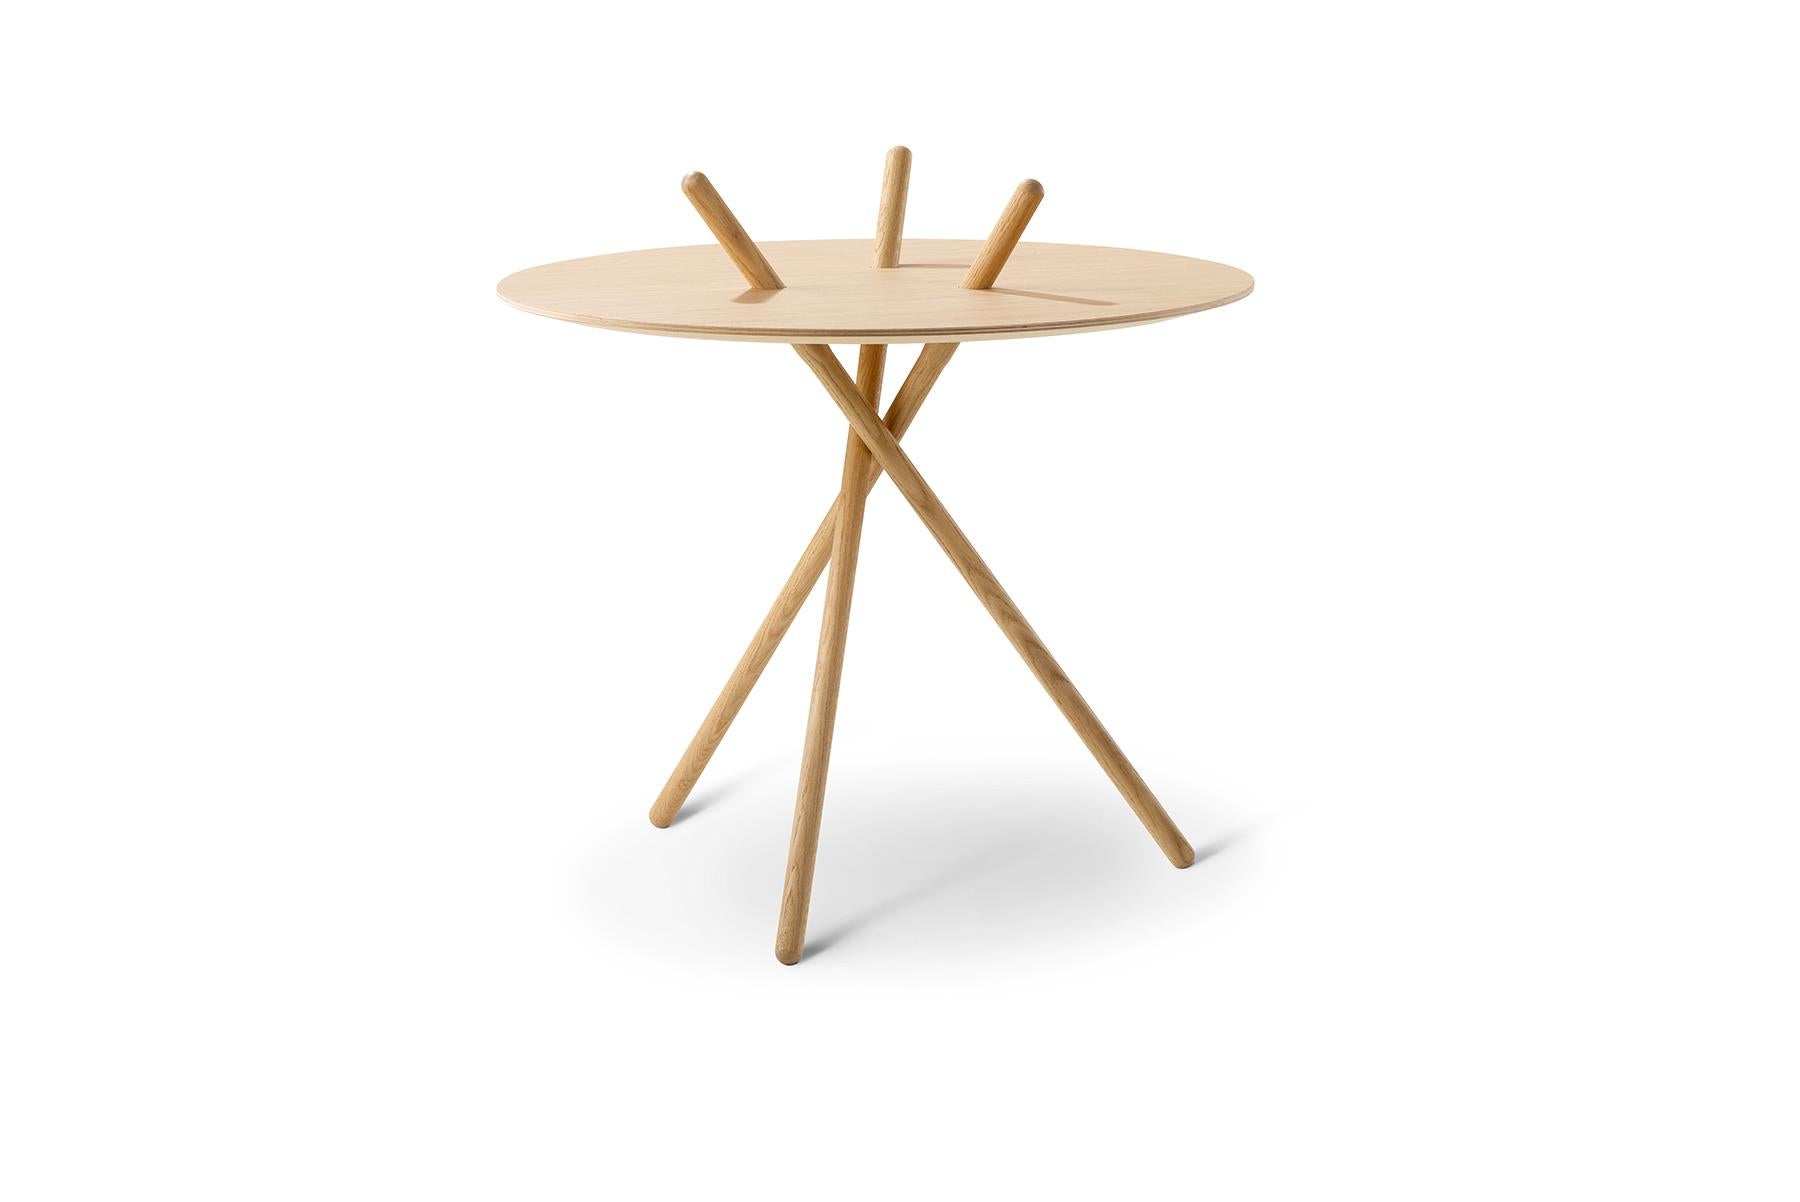 A game using sticks was the inspiration behind Cecilie Manz Micado coffee table. The simple, three-legged construction is assembled without hardware and supports itself.